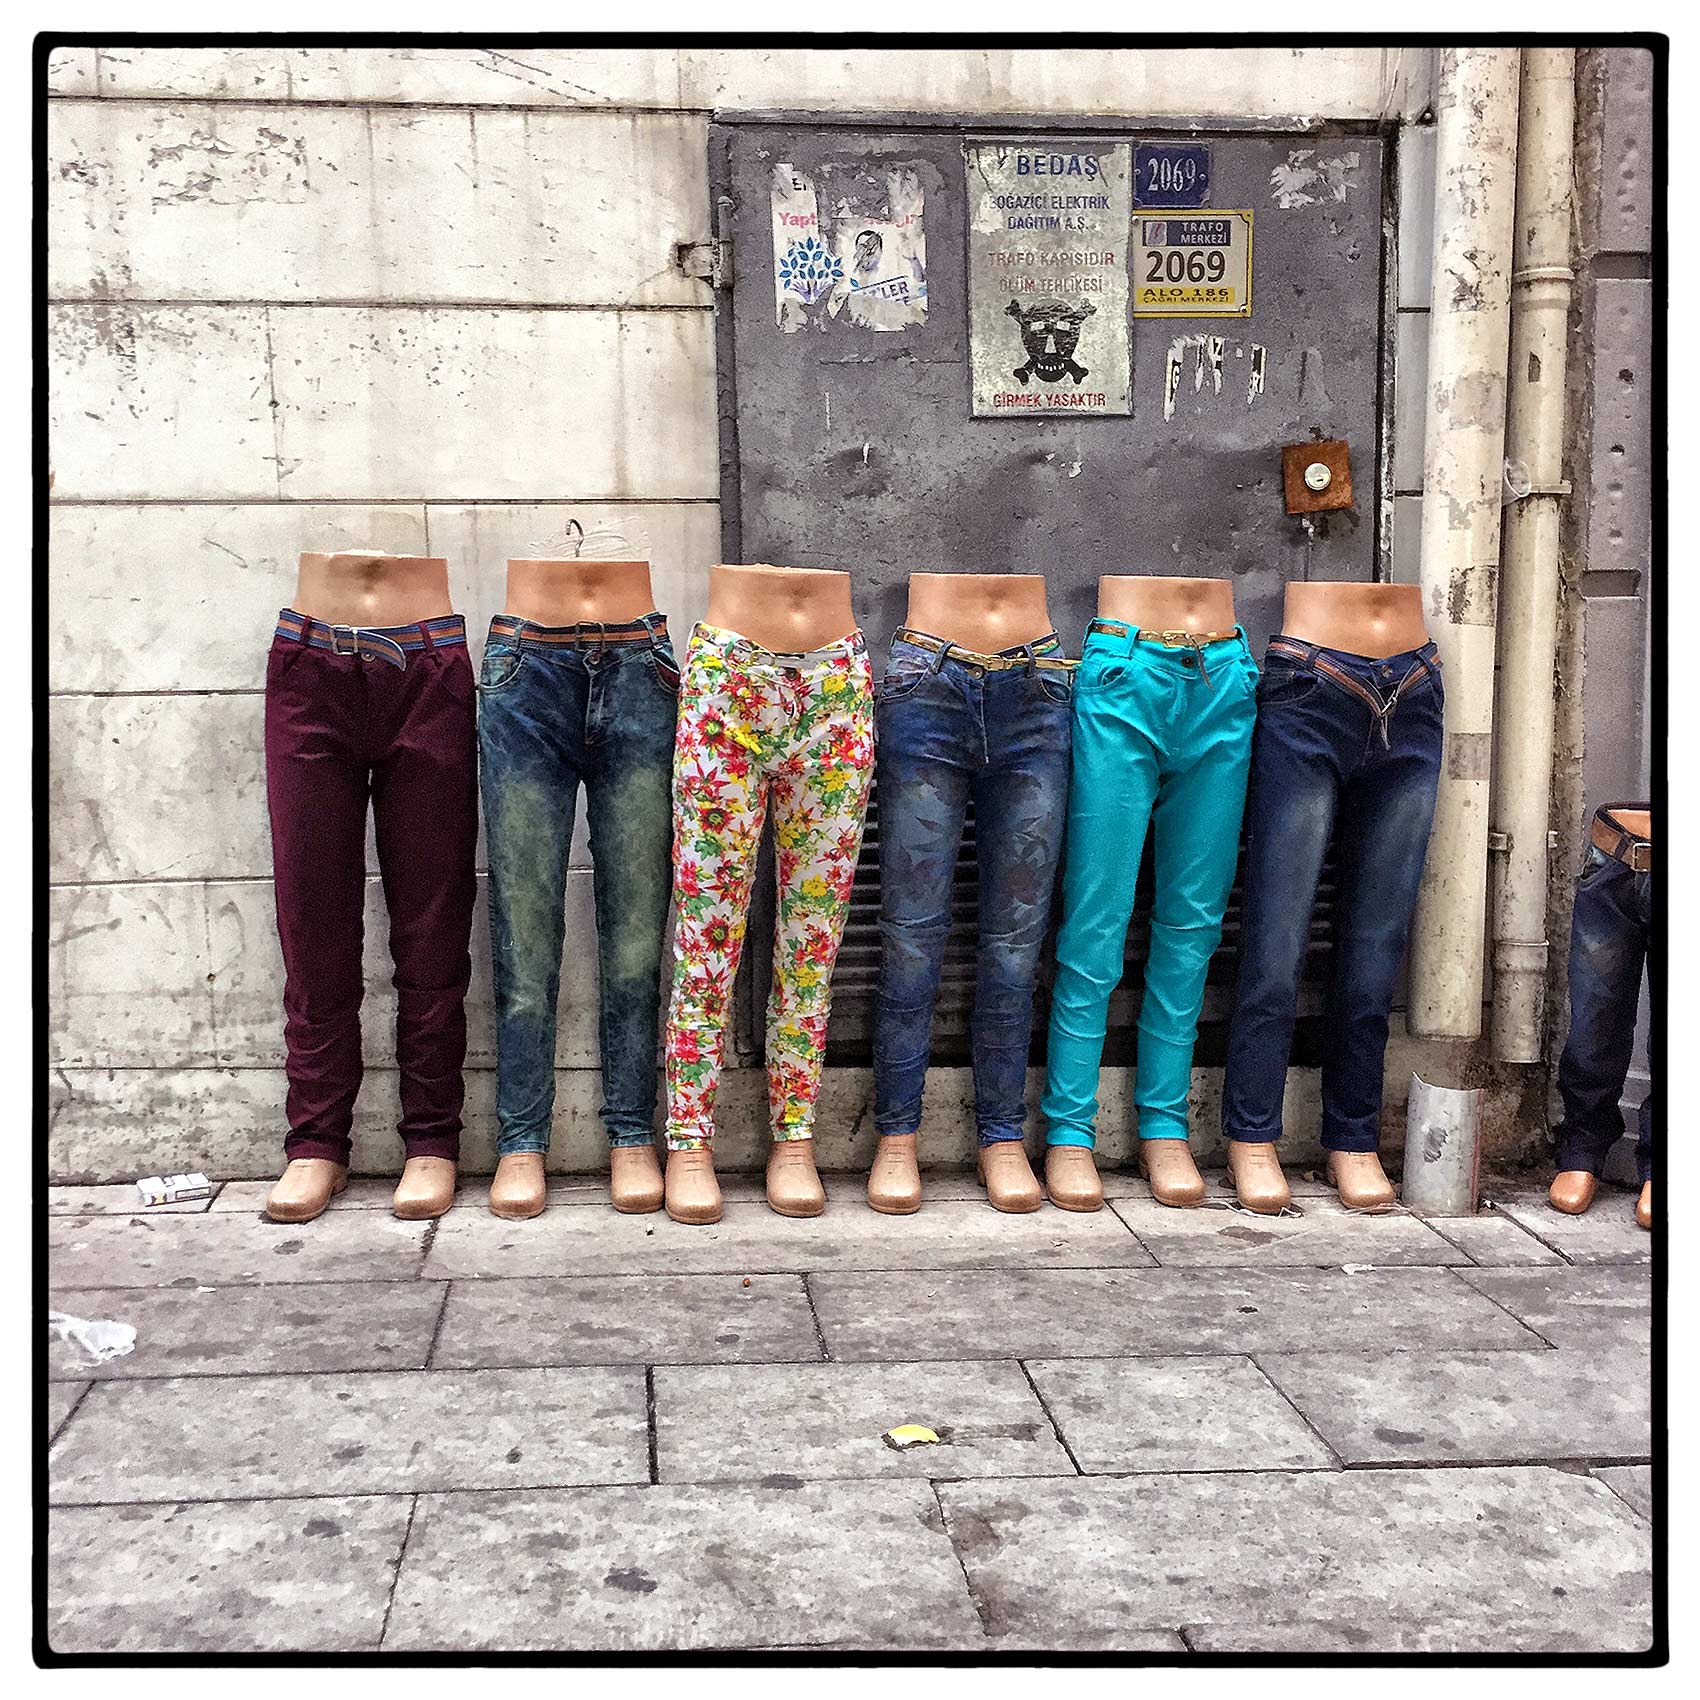 a-row-of-half-body-mannequins-are-lined-up-on-a-street-in-istanbul-turkey